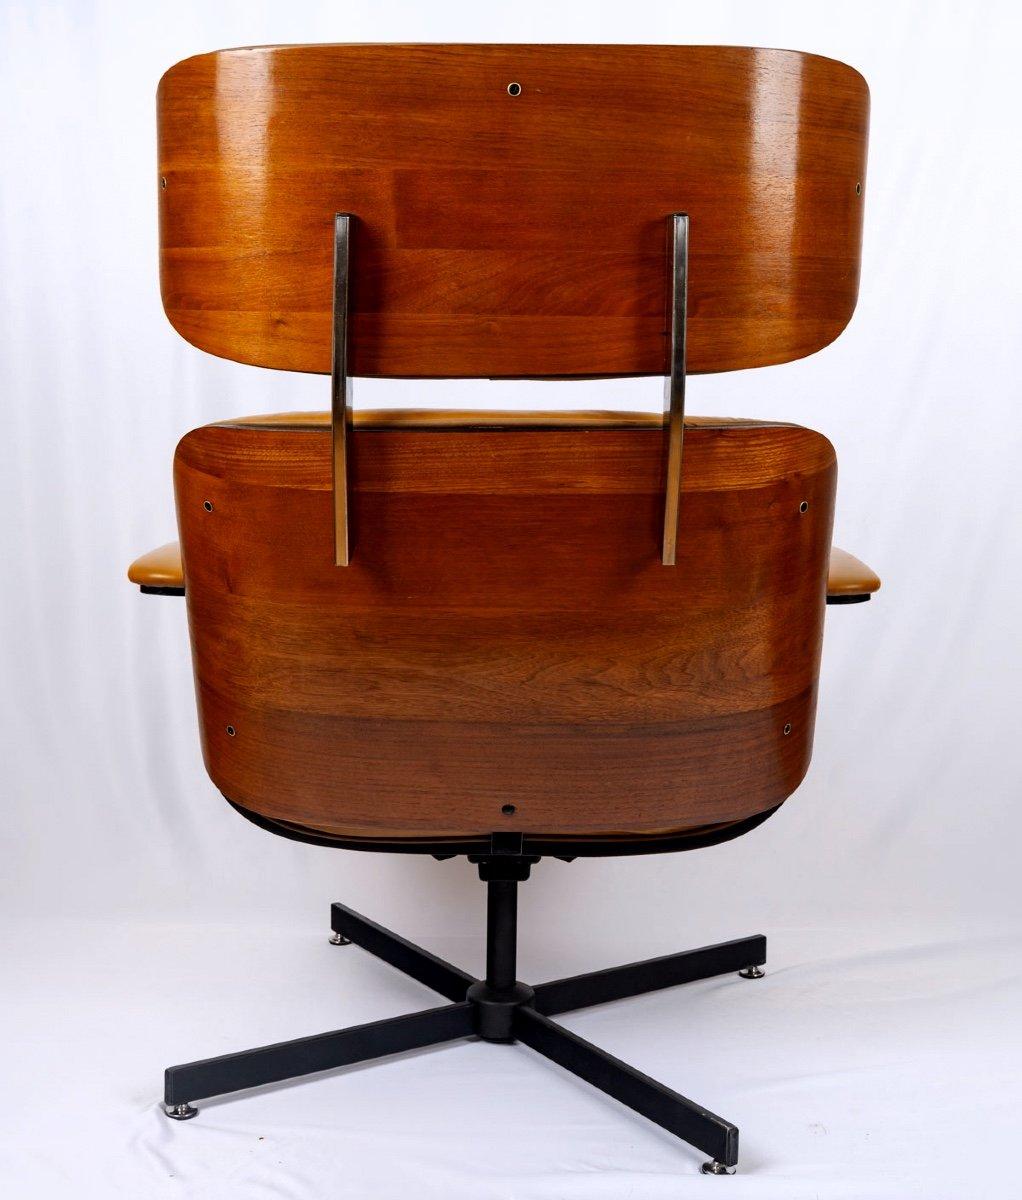 Charles and Ray Eames & Mobilier International.
A very fine Lounge Chair and Ottoman set, sublimely upholstered in leather, on thermoformed plywood and rosewood veneer shells, with injected aluminium legs and backrest brackets.

Charles and Ray